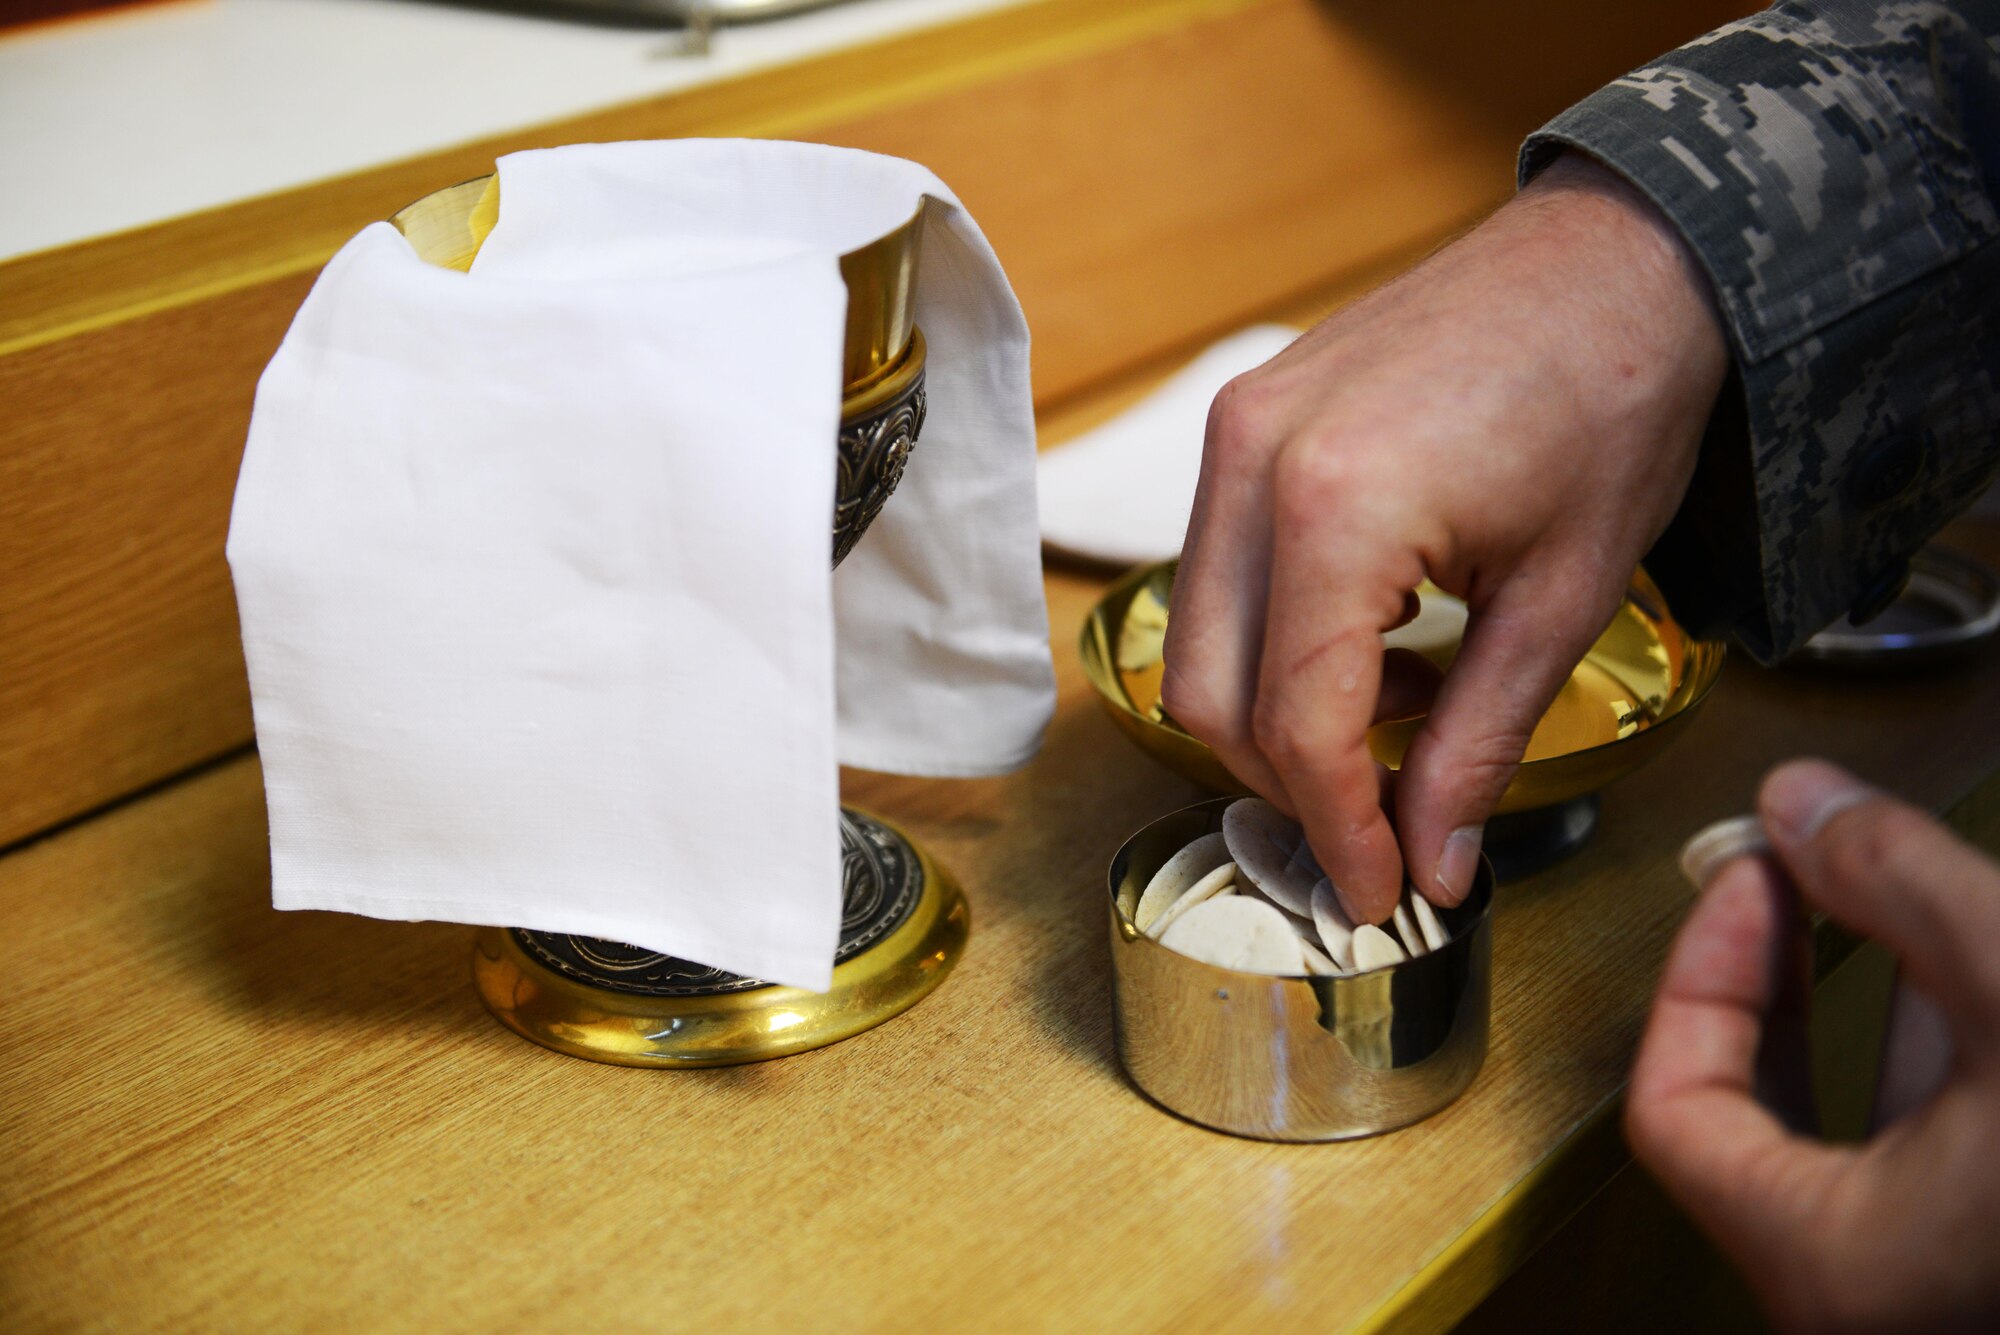 Technical. Sgt. Jere Ross, 86th Airlift Wing chaplain corps NCO in charge of plans and programs, prepares communion elements for a Catholic mass at Ramstein Air Base, Germany, Sept. 21, 2016. Religious support teams, consisting of one chaplain and one chaplain assistant, engage with Airmen using a variety of programs and methods in order to meet their religious and spiritual needs. (U.S. Air Force photo/ Airman 1st Class Joshua Magbanua)